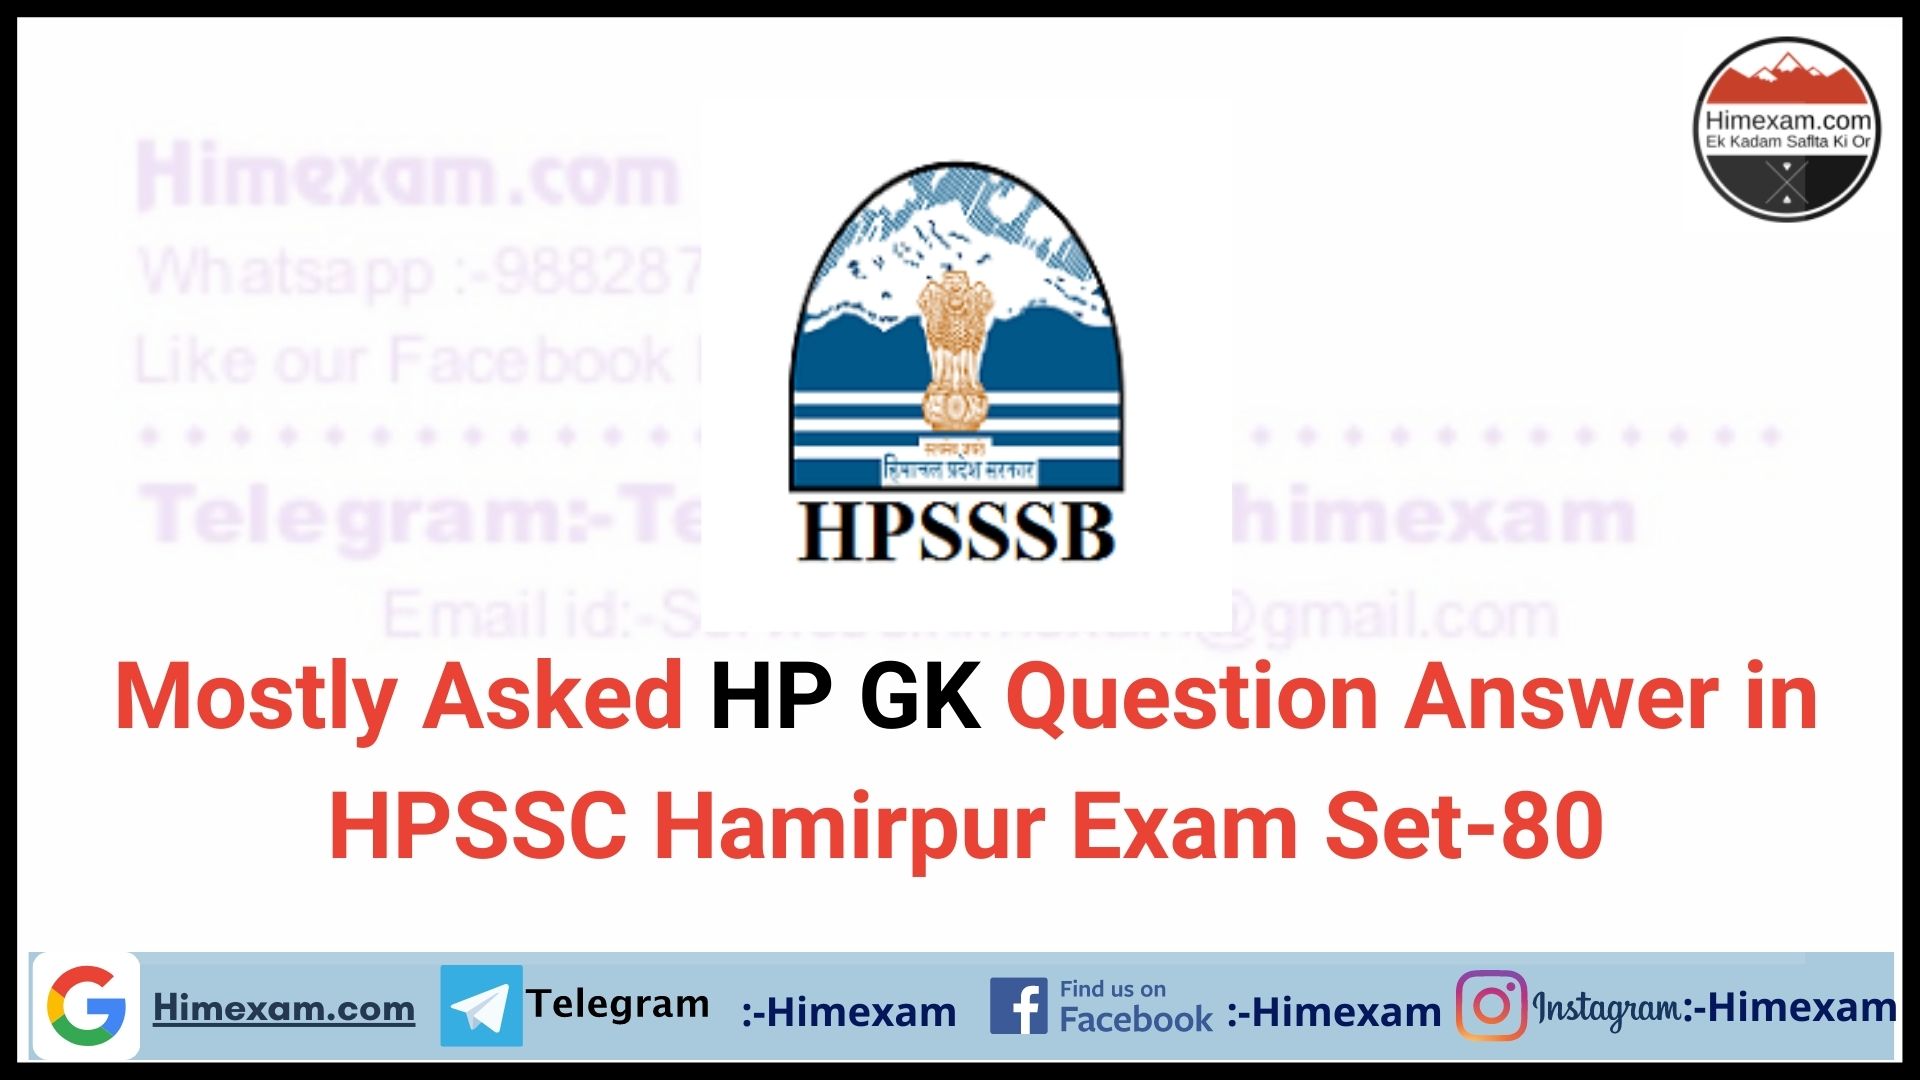 Mostly Asked HP GK Question Answer in HPSSC Hamirpur Exam Set-80